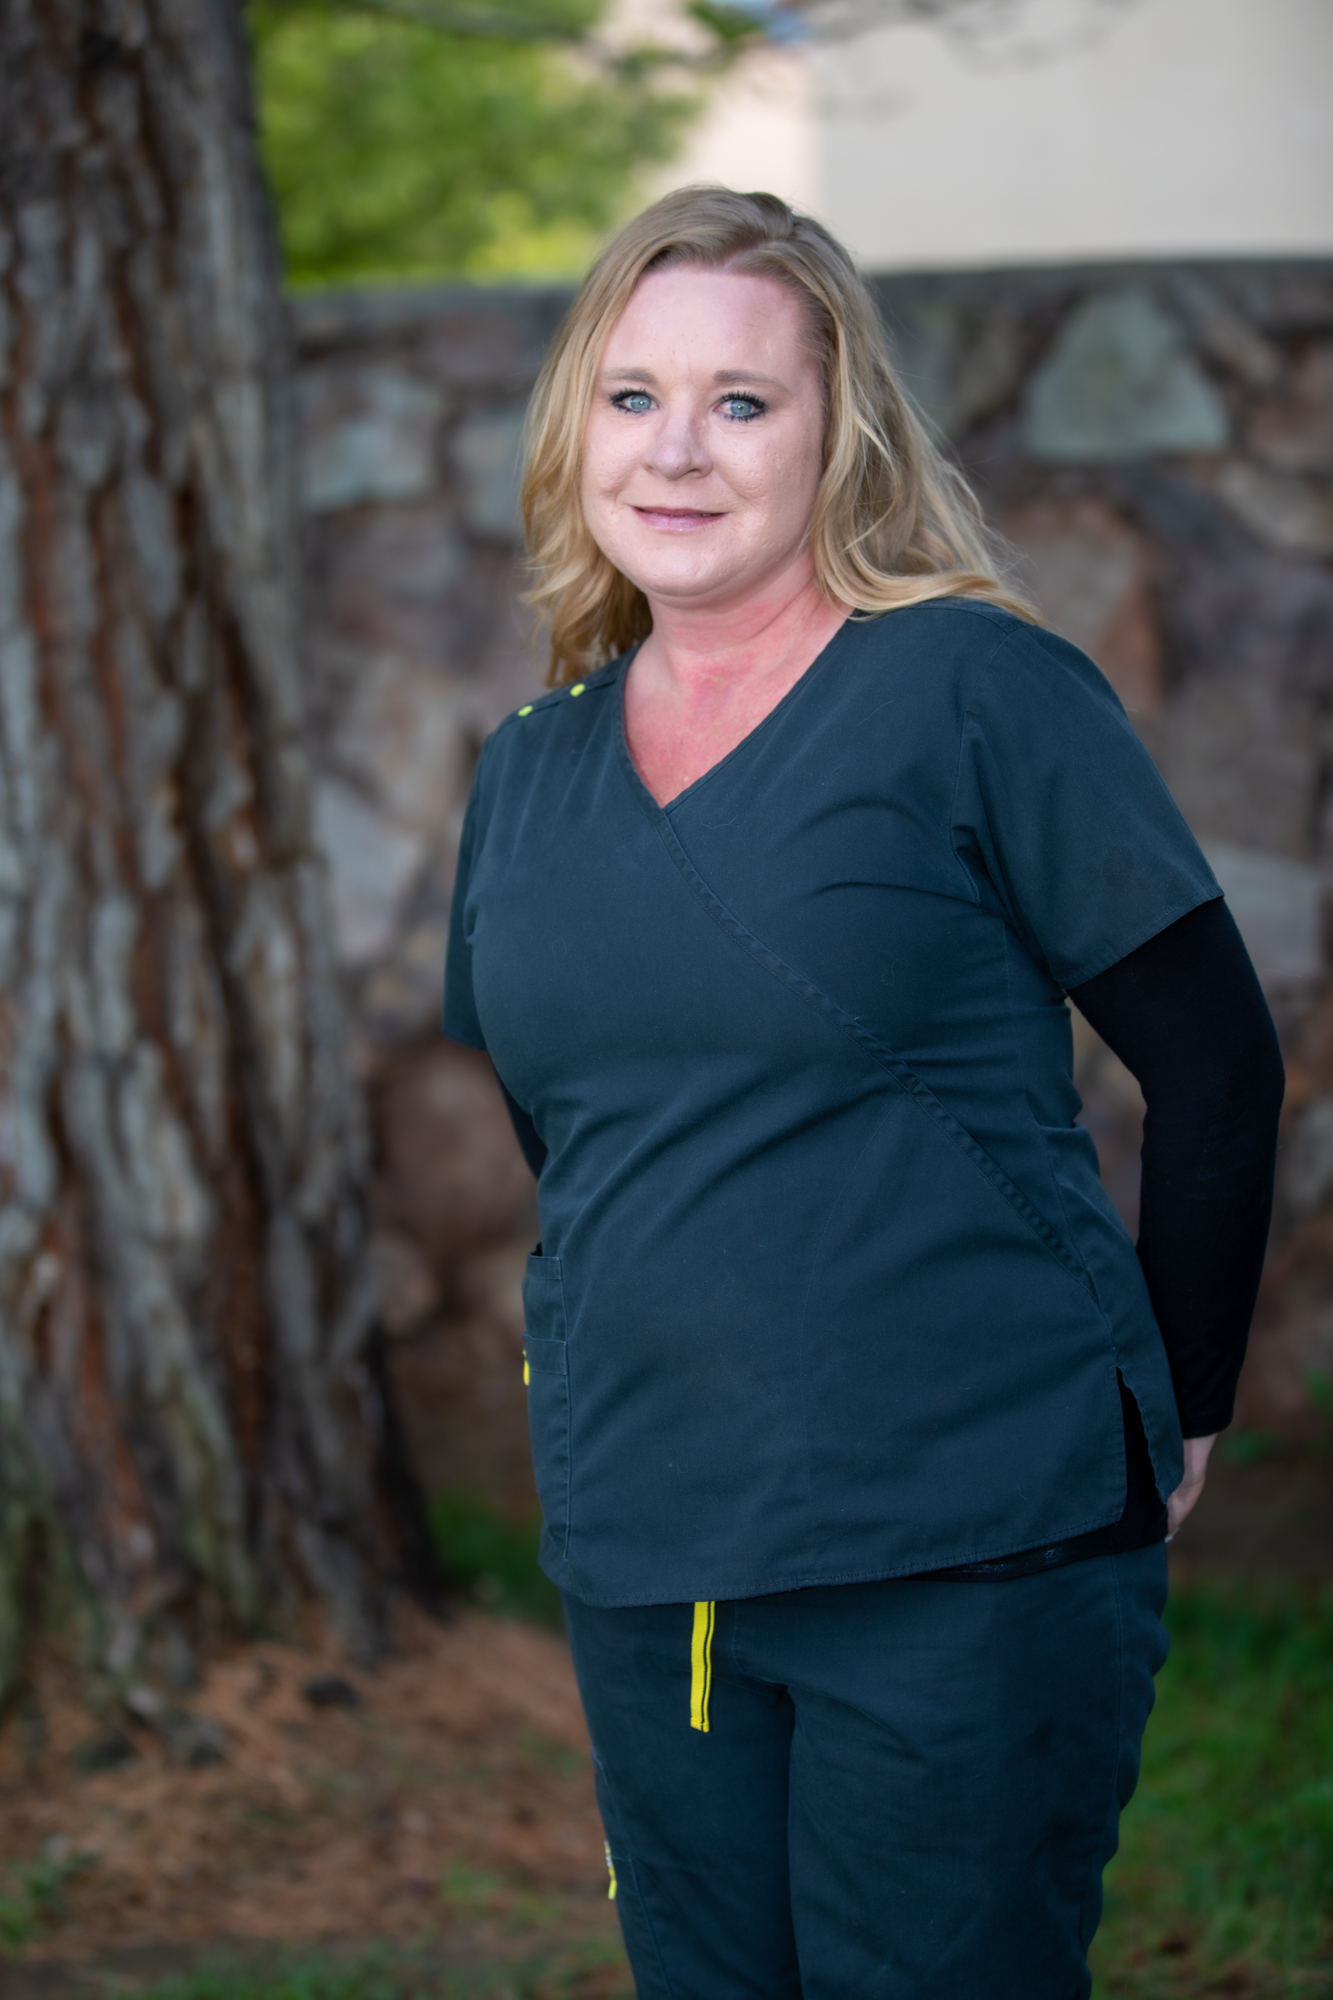 about the staff hygienist Dr. Westover Dr. Slade Dr. Griffin Dr. Peterson. Mountain View Dental General, Cosmetic, Restorative, Preventative Dentist in Alamogordo, NM 88310